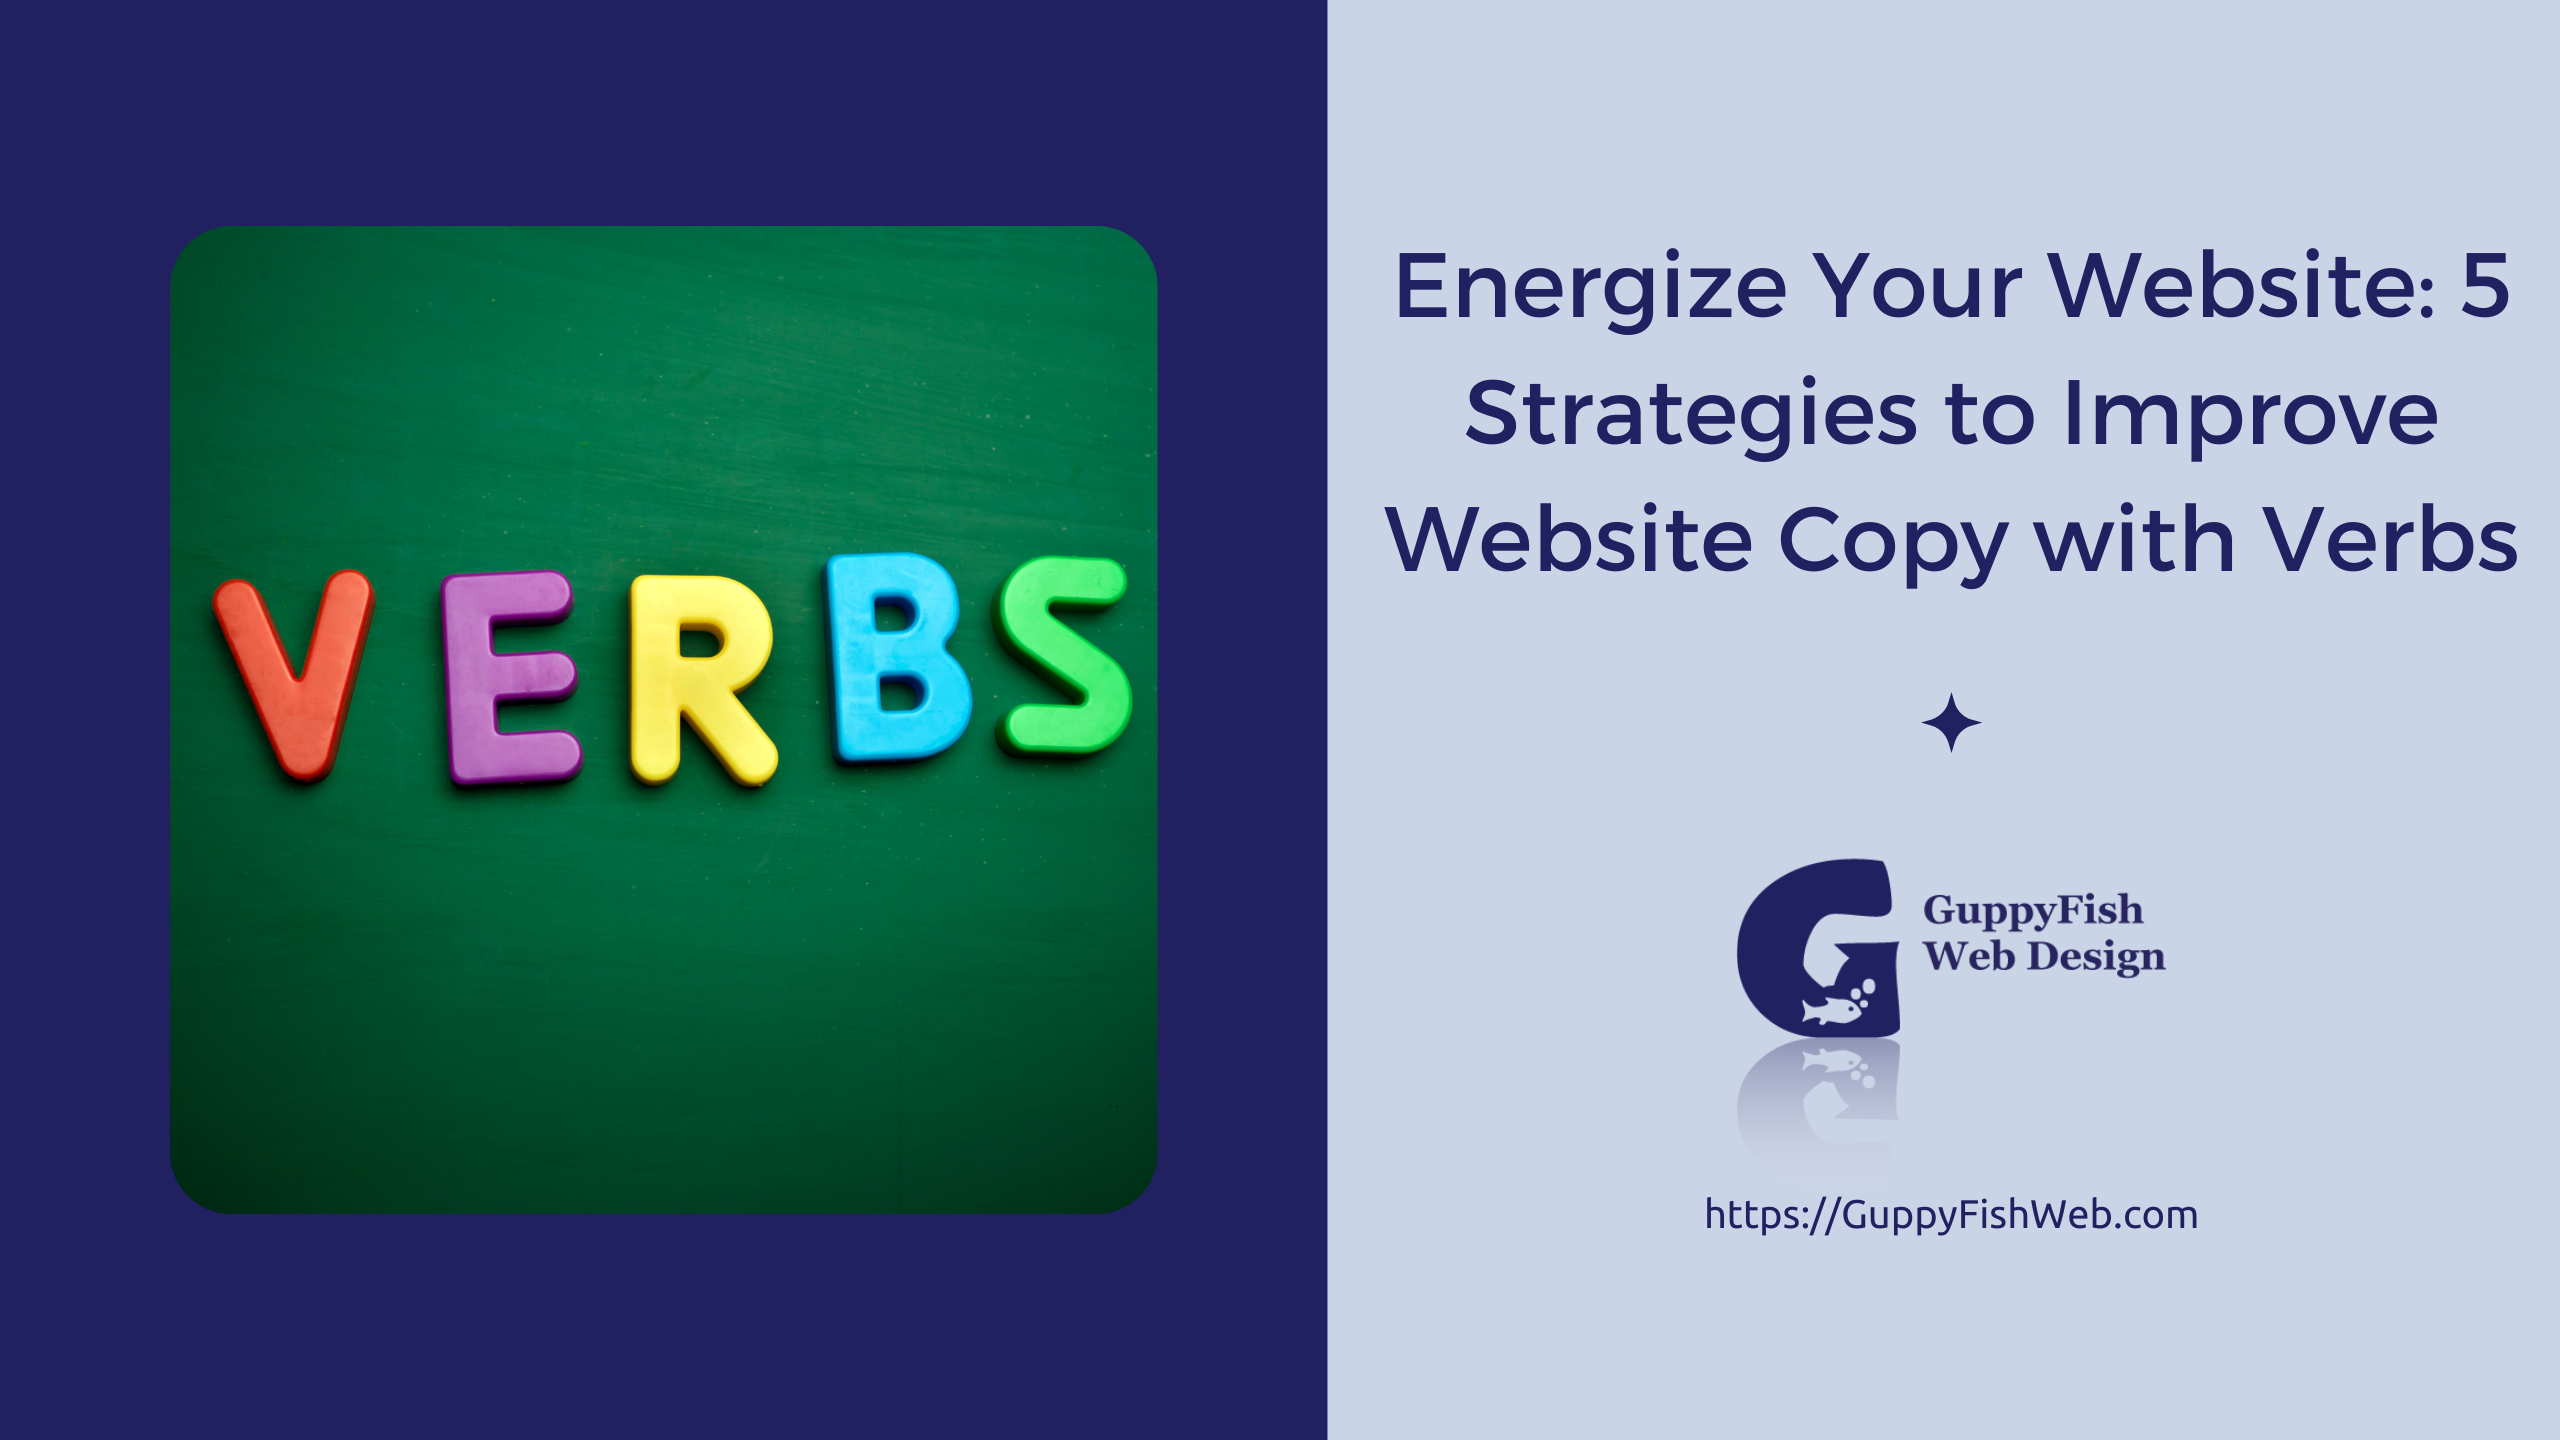 Energize Your Website: 5 Strategies to Improve Website Copy with Verbs